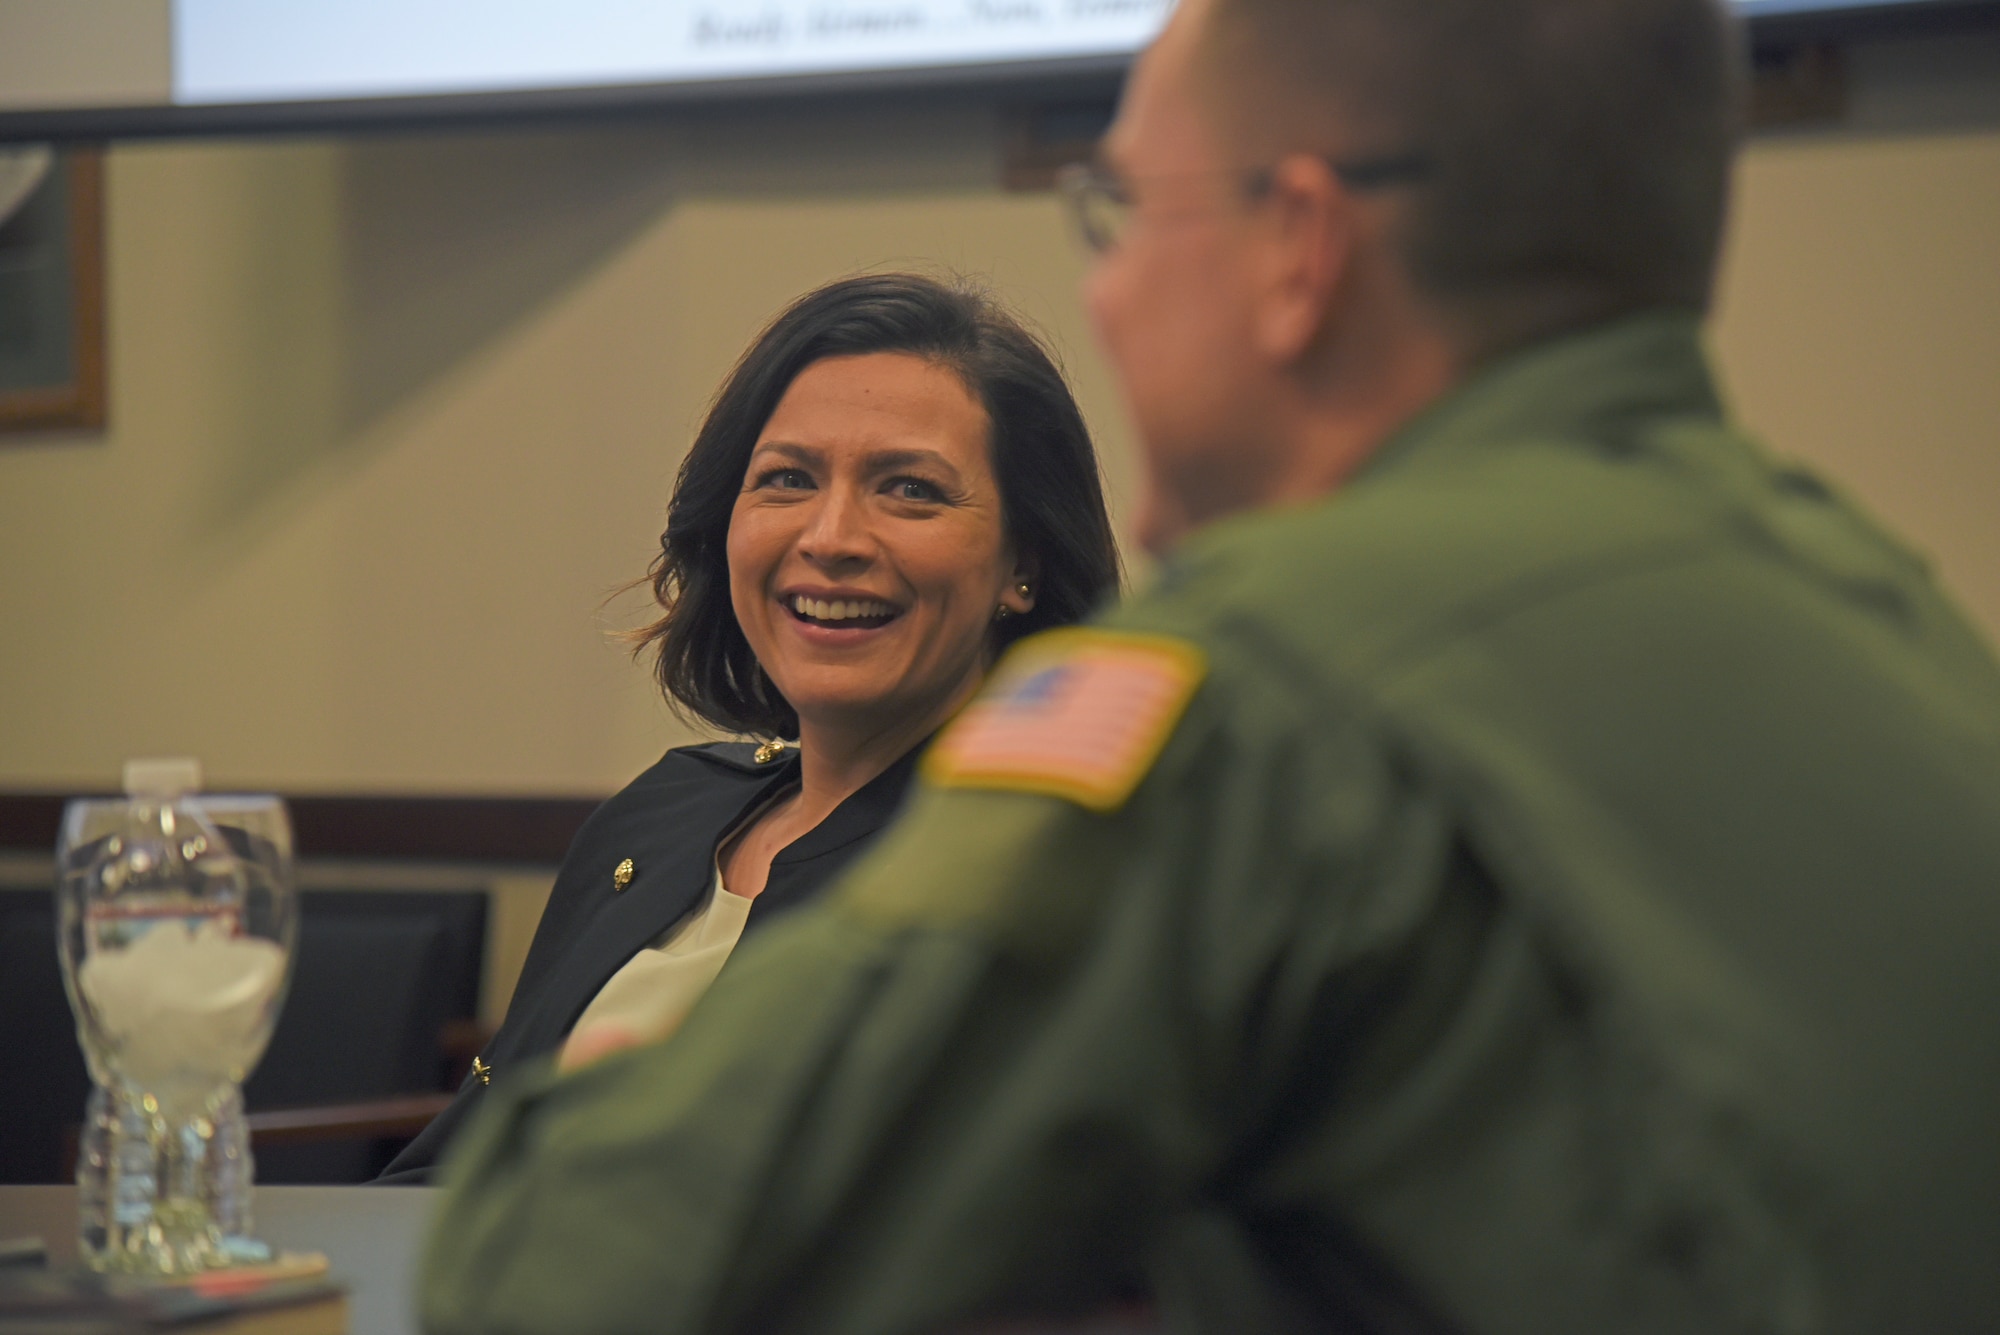 Dr. Addy Wissel, Gonzaga University School Counseling Program director and assistant professor, joins Col. Scot Heathman for a mission brief during a base tour at Fairchild Air Force Base, Washington, April 17, 2018. The Master of Arts in School Counseling Program prepares students for a career as a professional counselor in the K-12 school setting. The program features a group model, which allows students to progress through the two-year program with the same small group of peers and build a valuable professional network of supportive colleagues. (U.S. Air Force photo/Senior Airman Mackenzie Richardson)